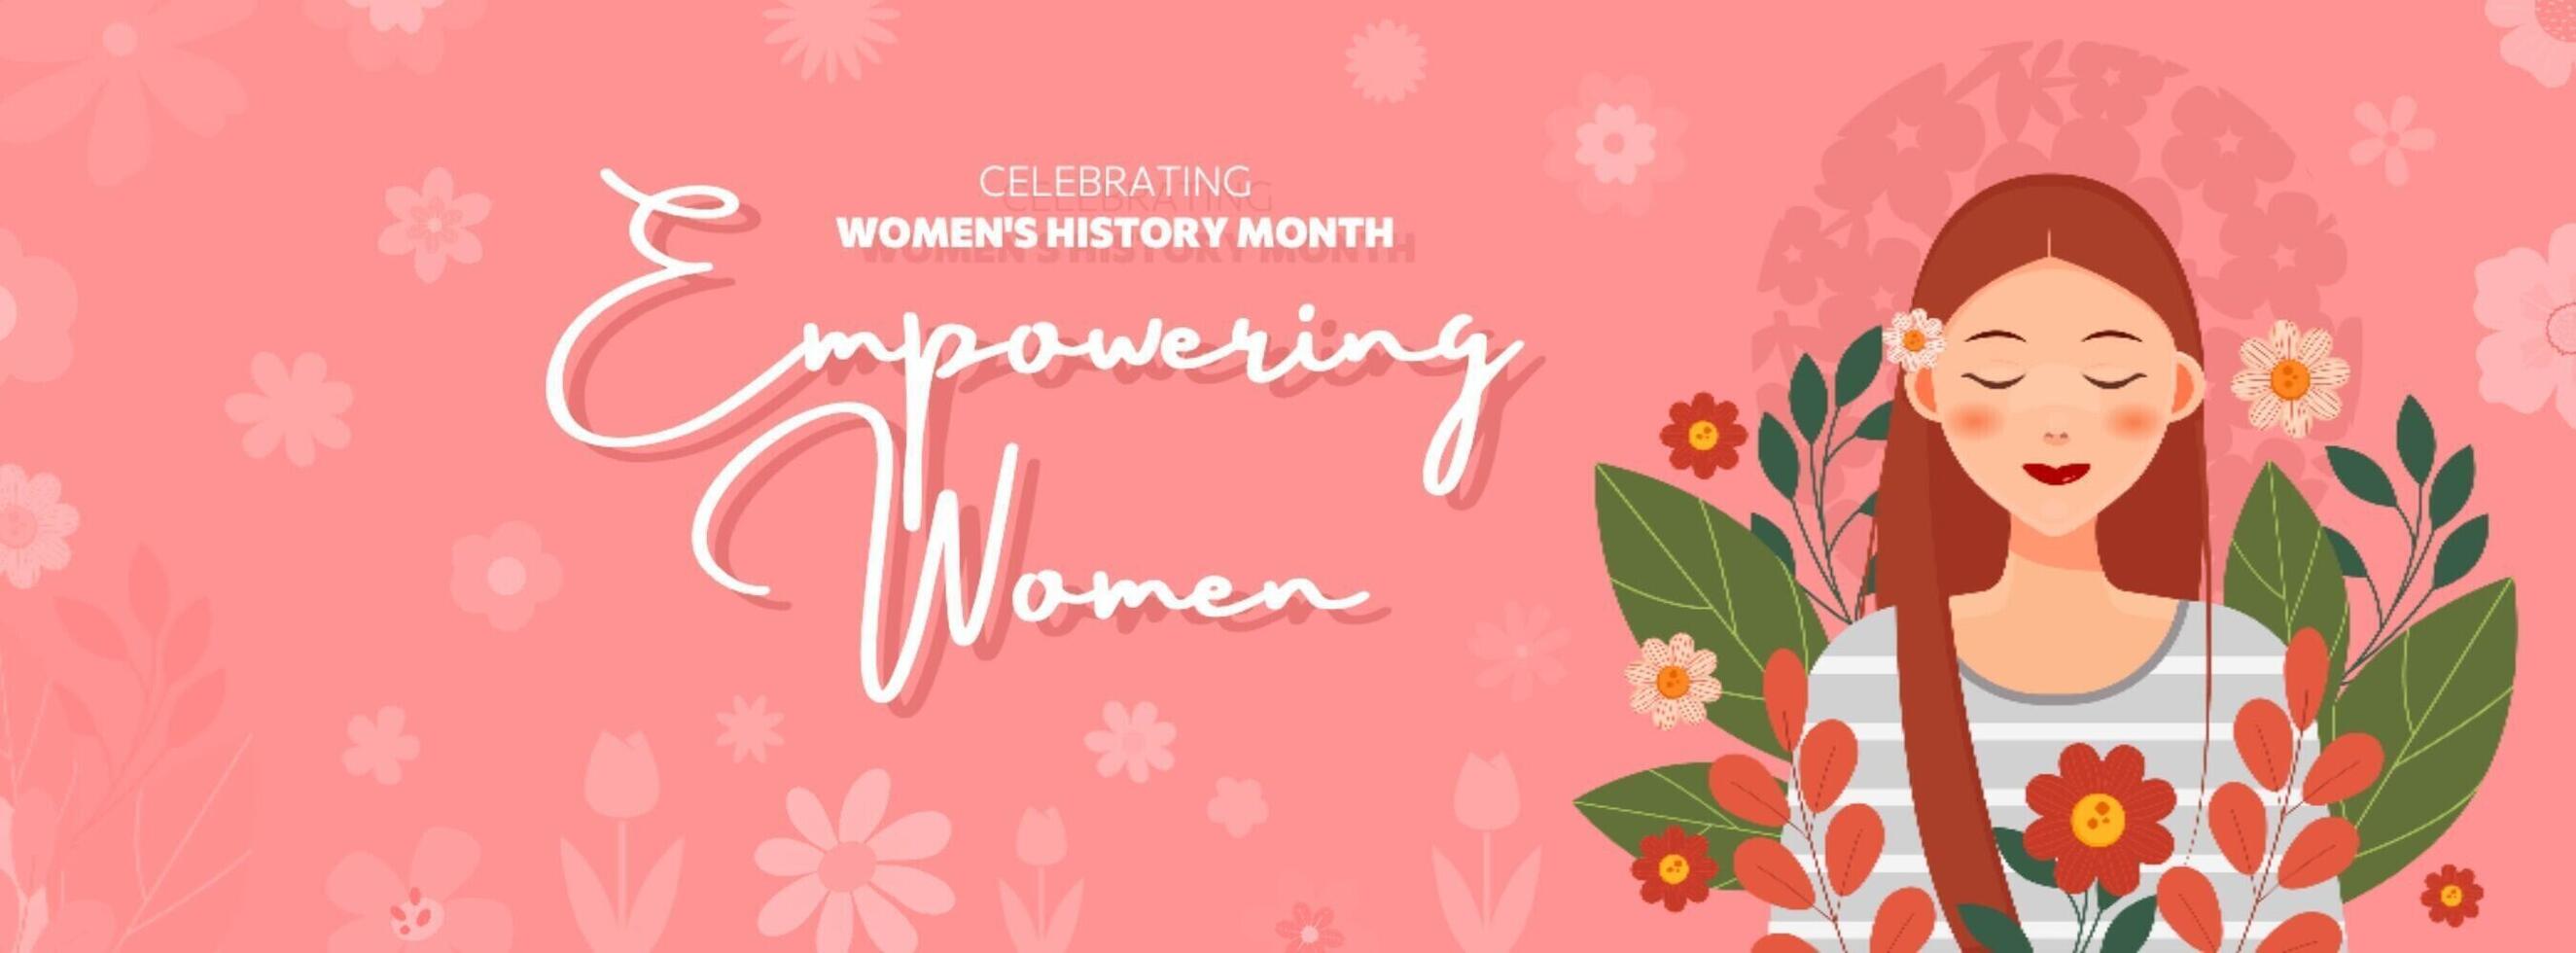 Women's History Month Campaign Facebook Cover template